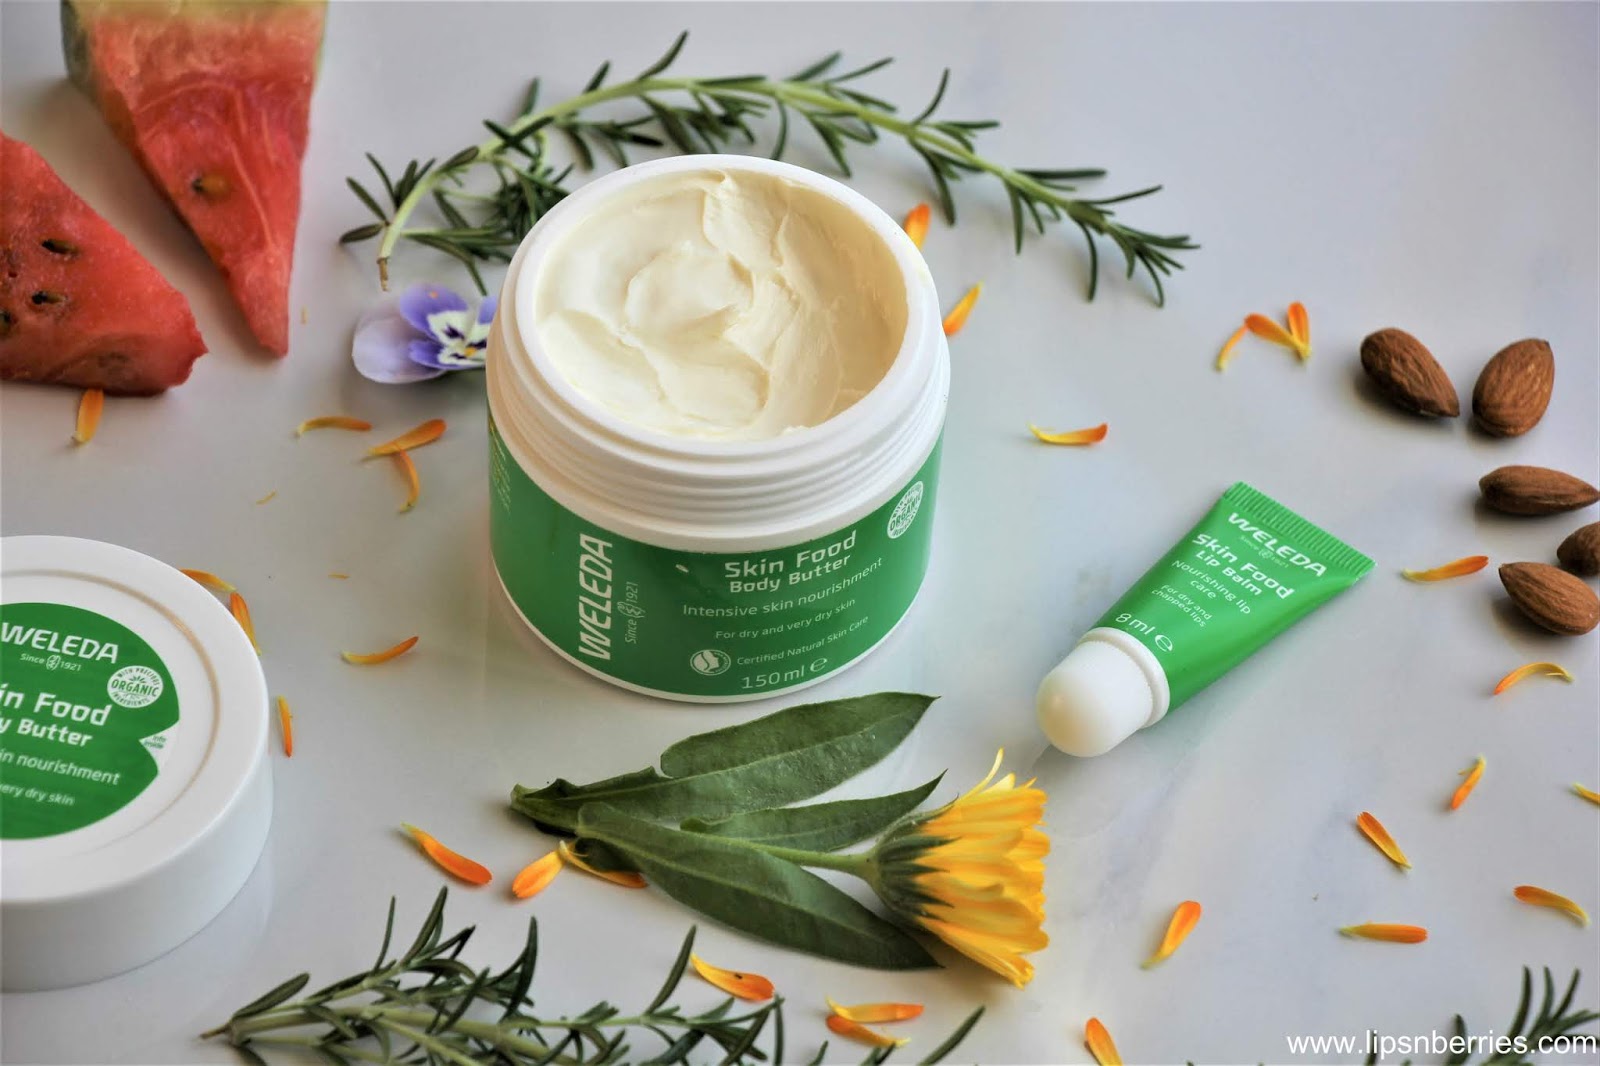 Weleda Skin Food Body Butter and Lip Balm Review